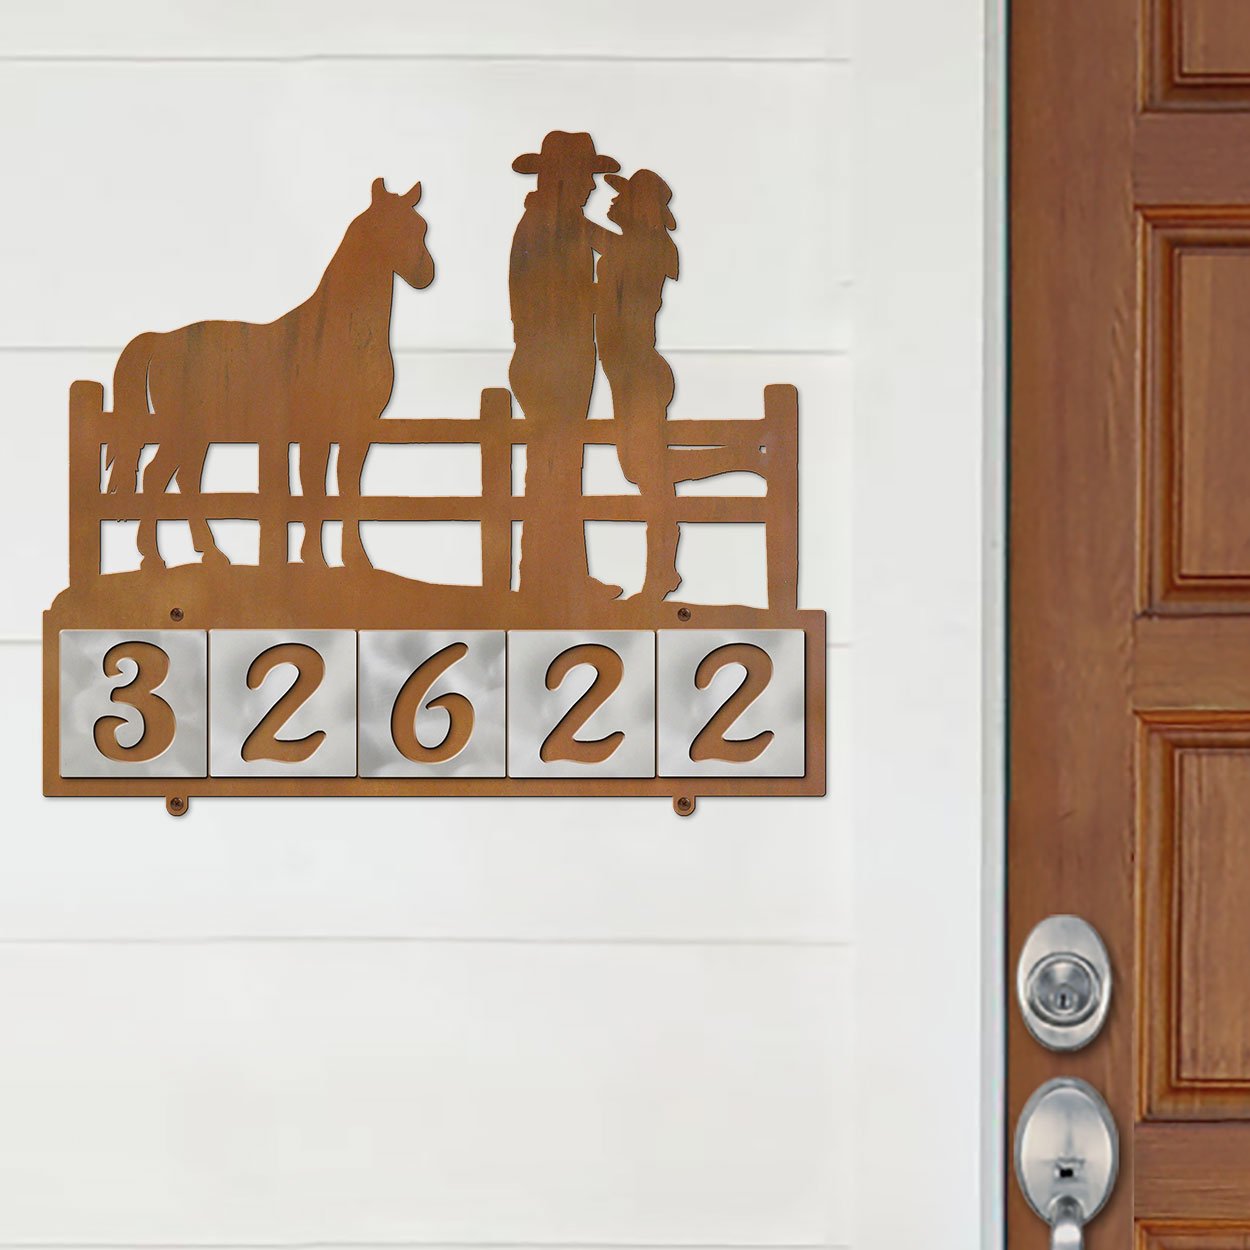 609115 - XL Cowboy Couple with Horse Design 5-Digit Horizontal 6in Tile Outdoor House Numbers